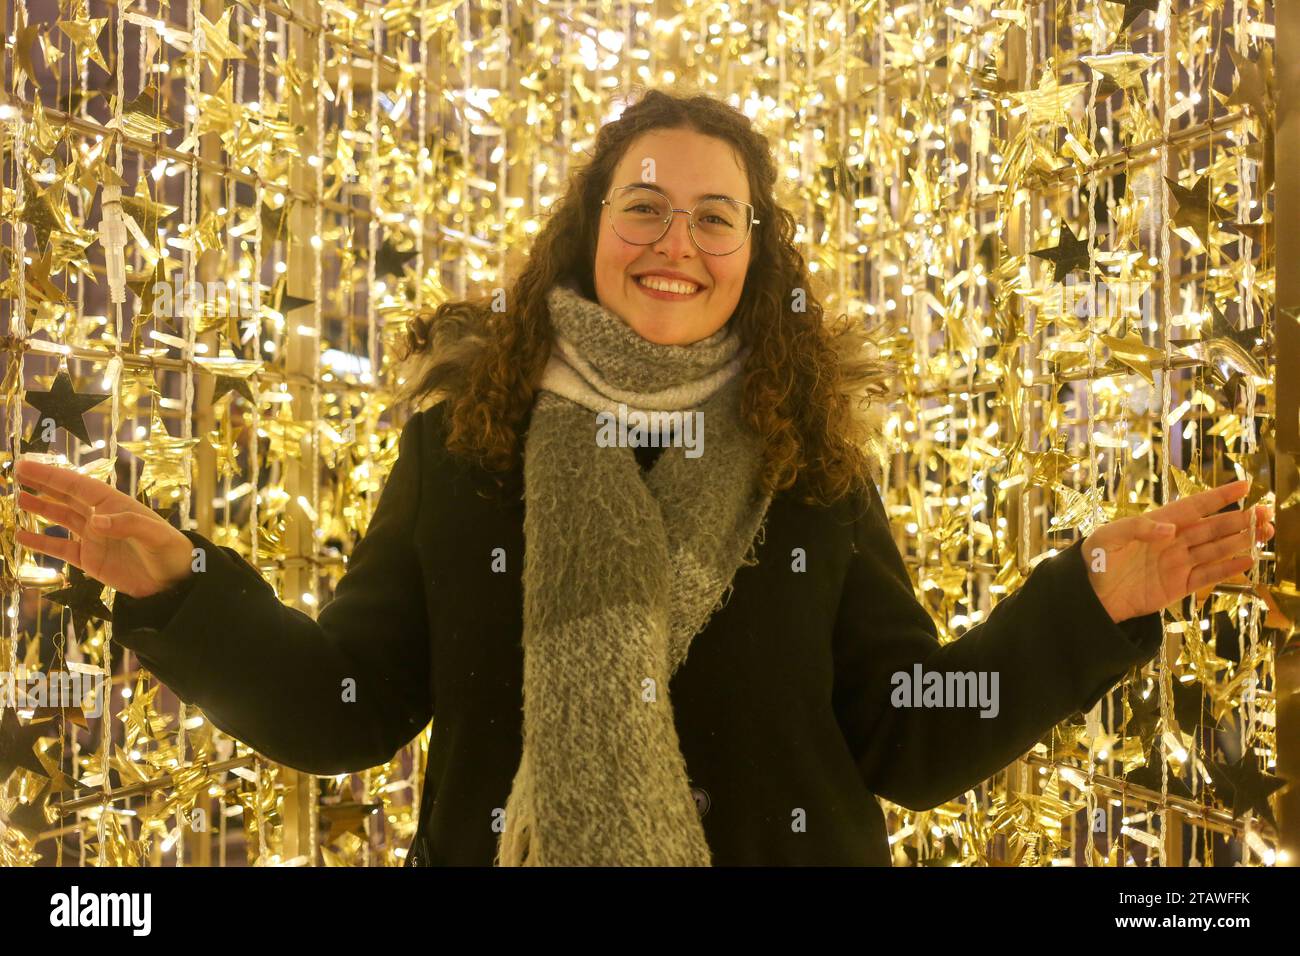 Oviedo, Spain, December 2nd, 2023: A girl poses inside the illuminated Star during the Christmas Lighting and Market, on December 2, 2023, in Oviedo, Spain. Credit: Alberto Brevers / Alamy Live News. Stock Photo